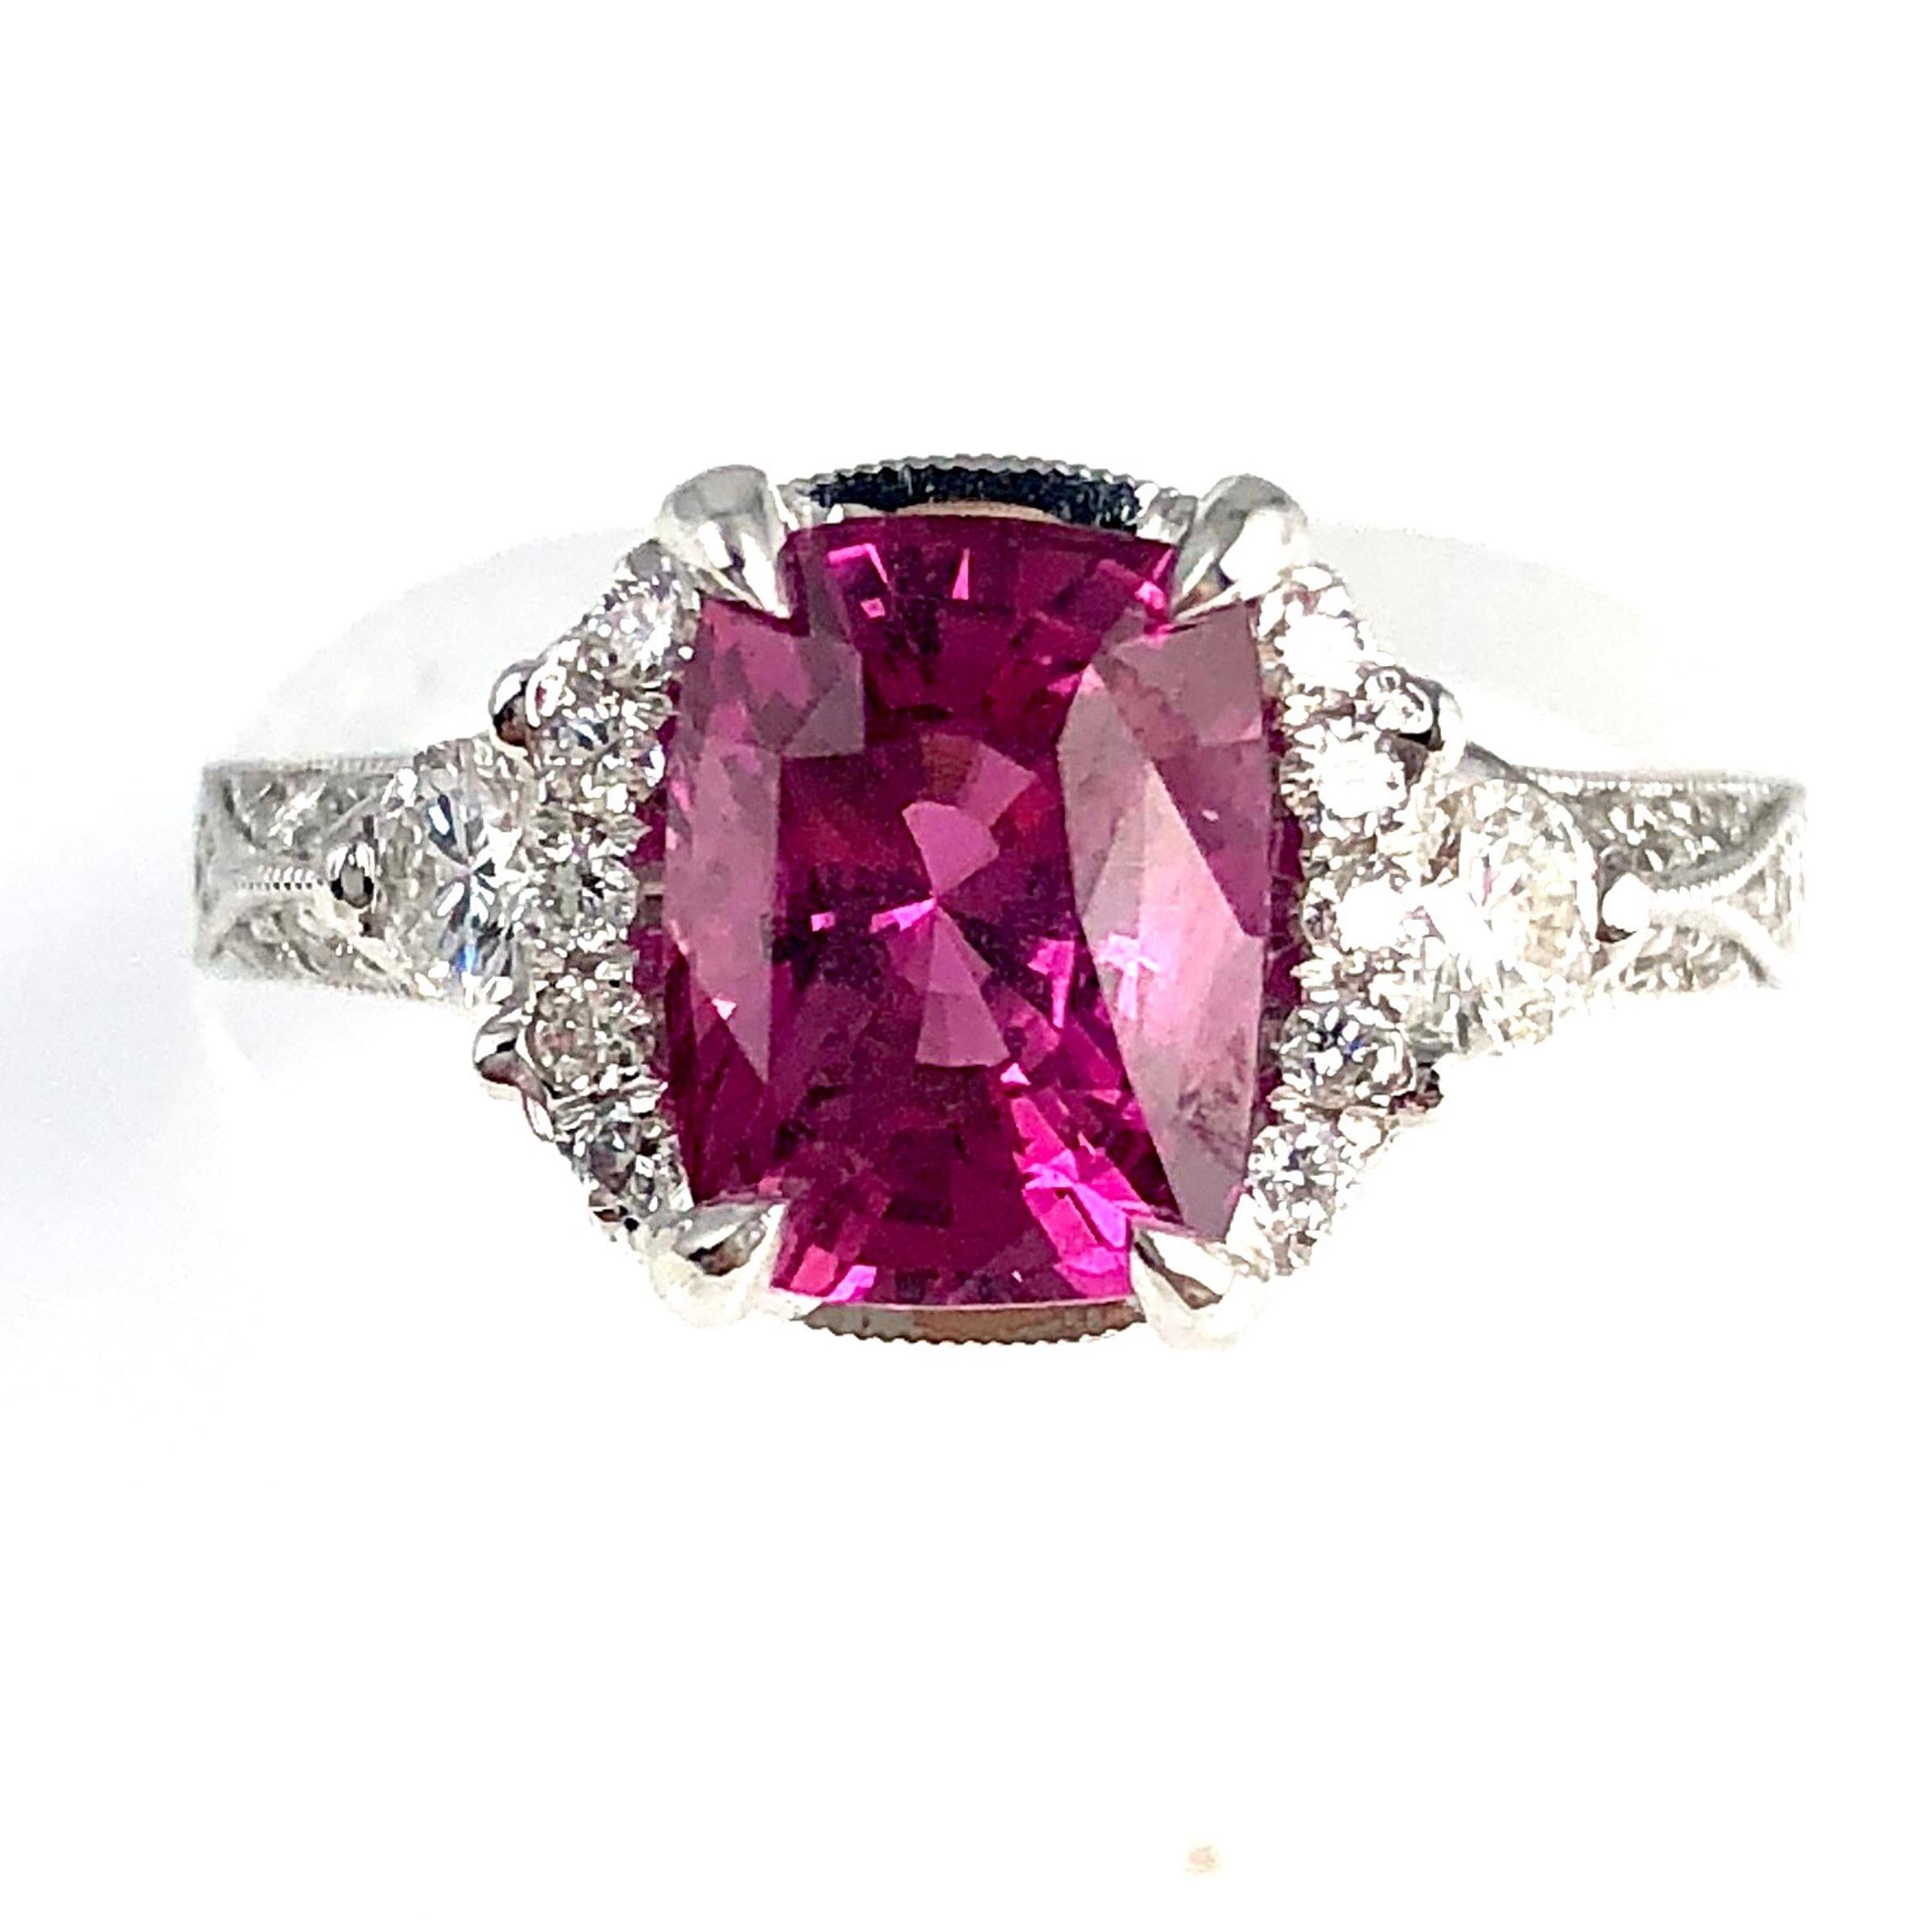 (DiamondTown) With a GIA Certified 2.39 carat cushion cut exotic pink sapphire center, and 0.61 carats white diamonds, this ring shines from every angle.

GIA Certification details (see photo):
The center sapphire is Transparent, Purplish-Pink, 8.51